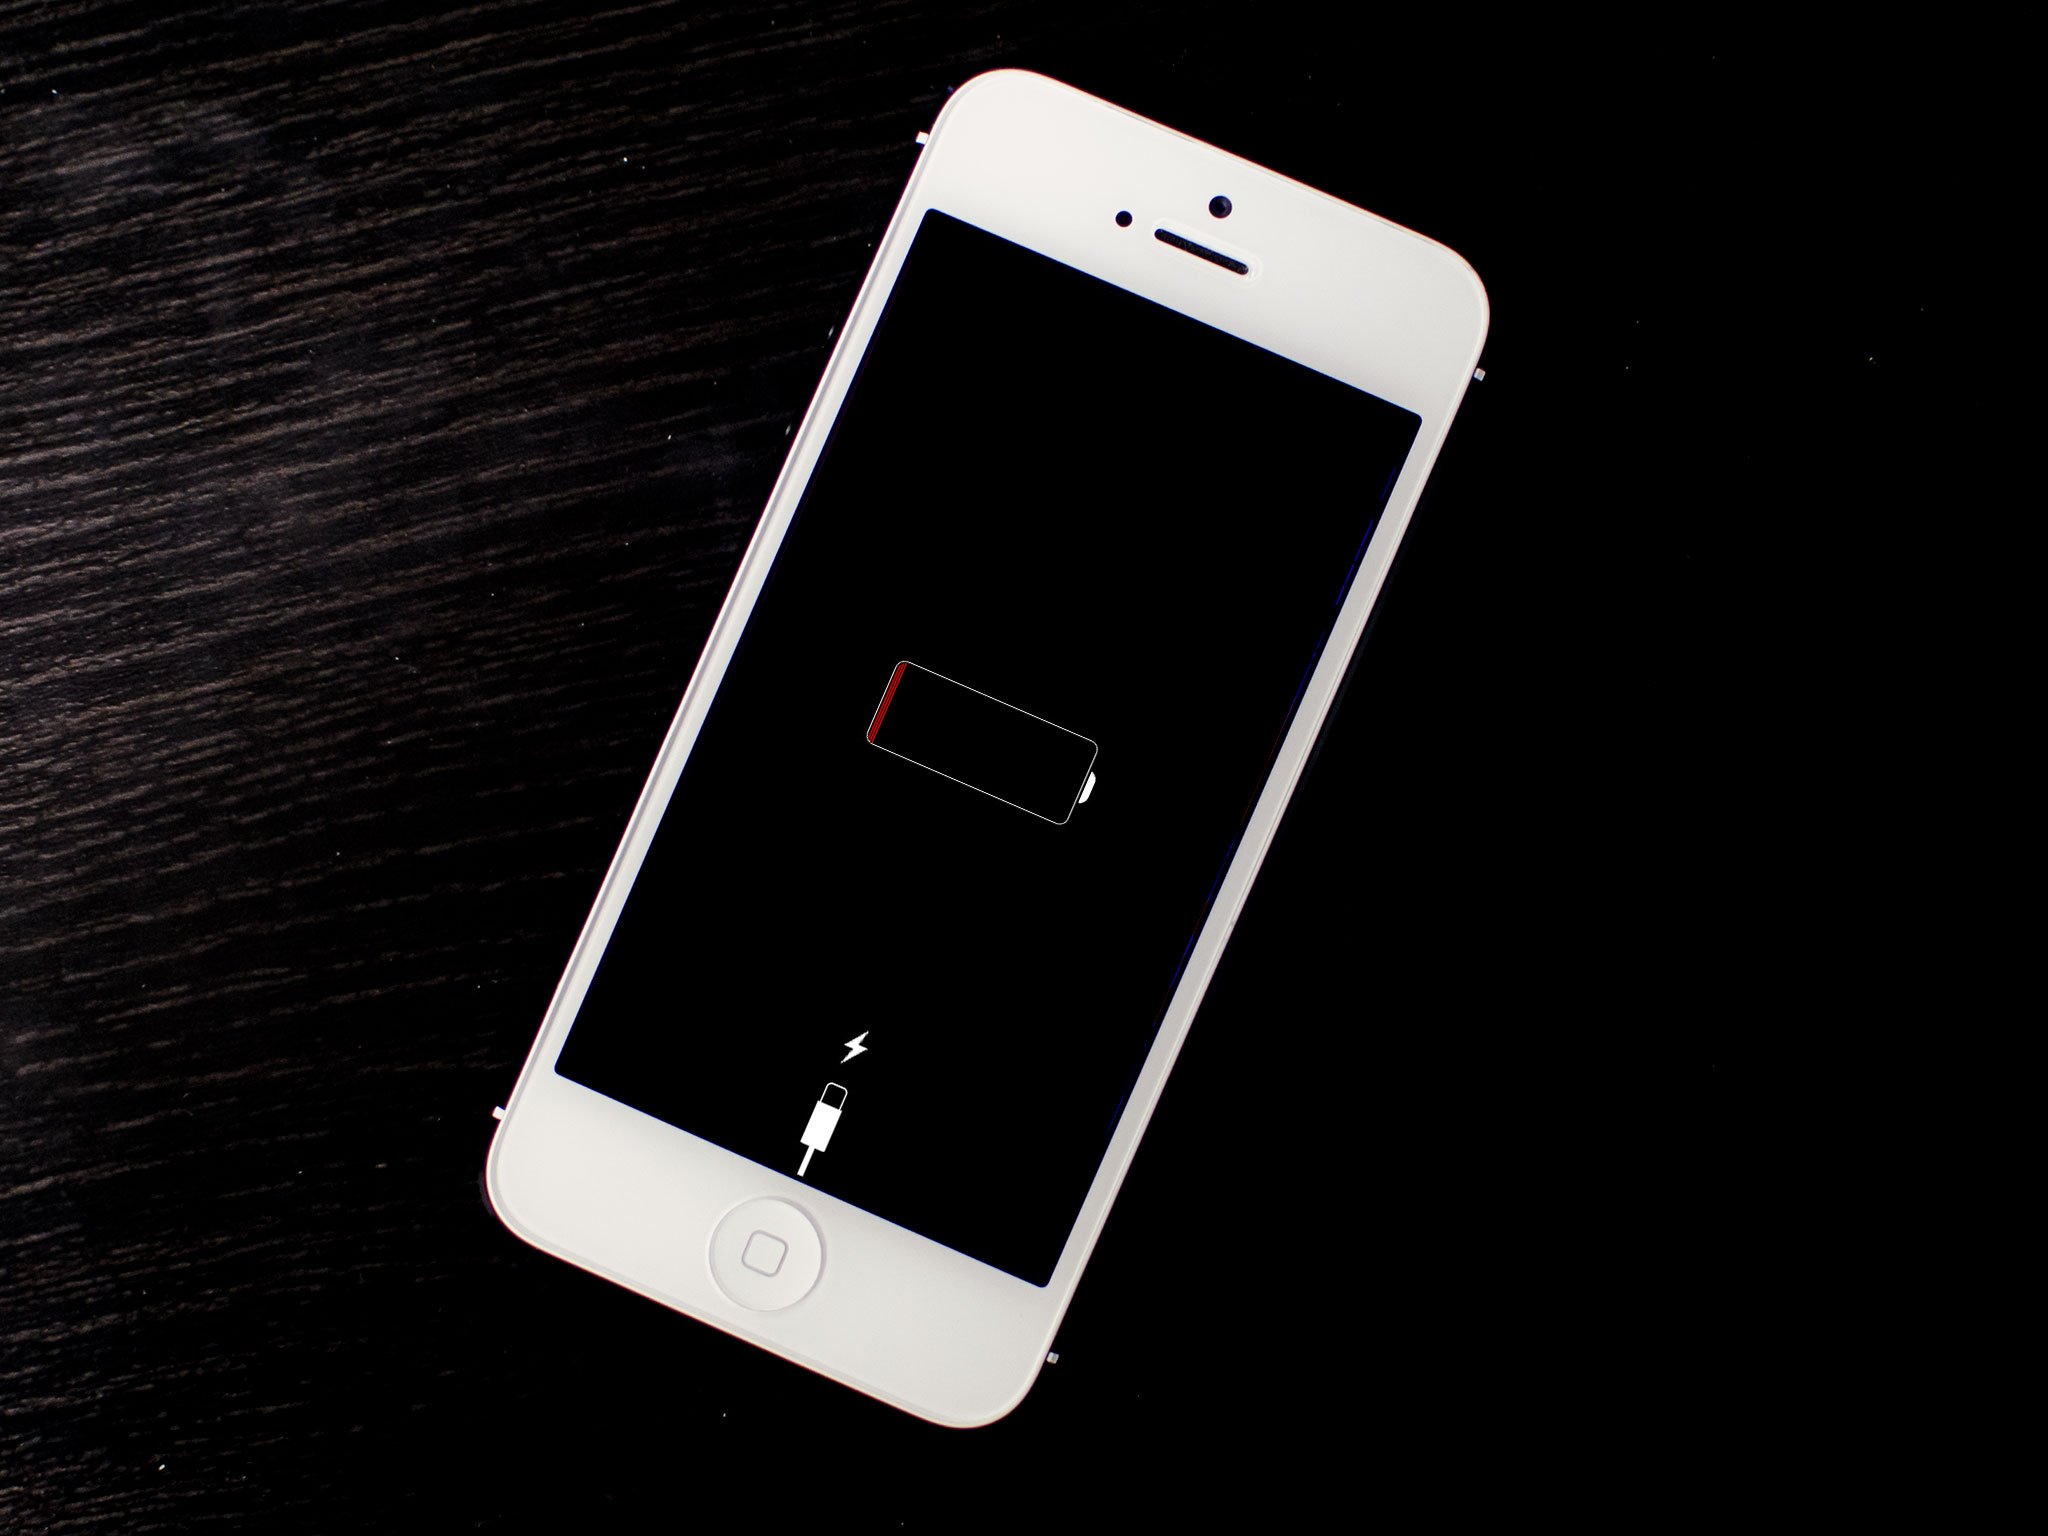 iPhone or iPad keeps shutting off? Here's how to fix it! iMore